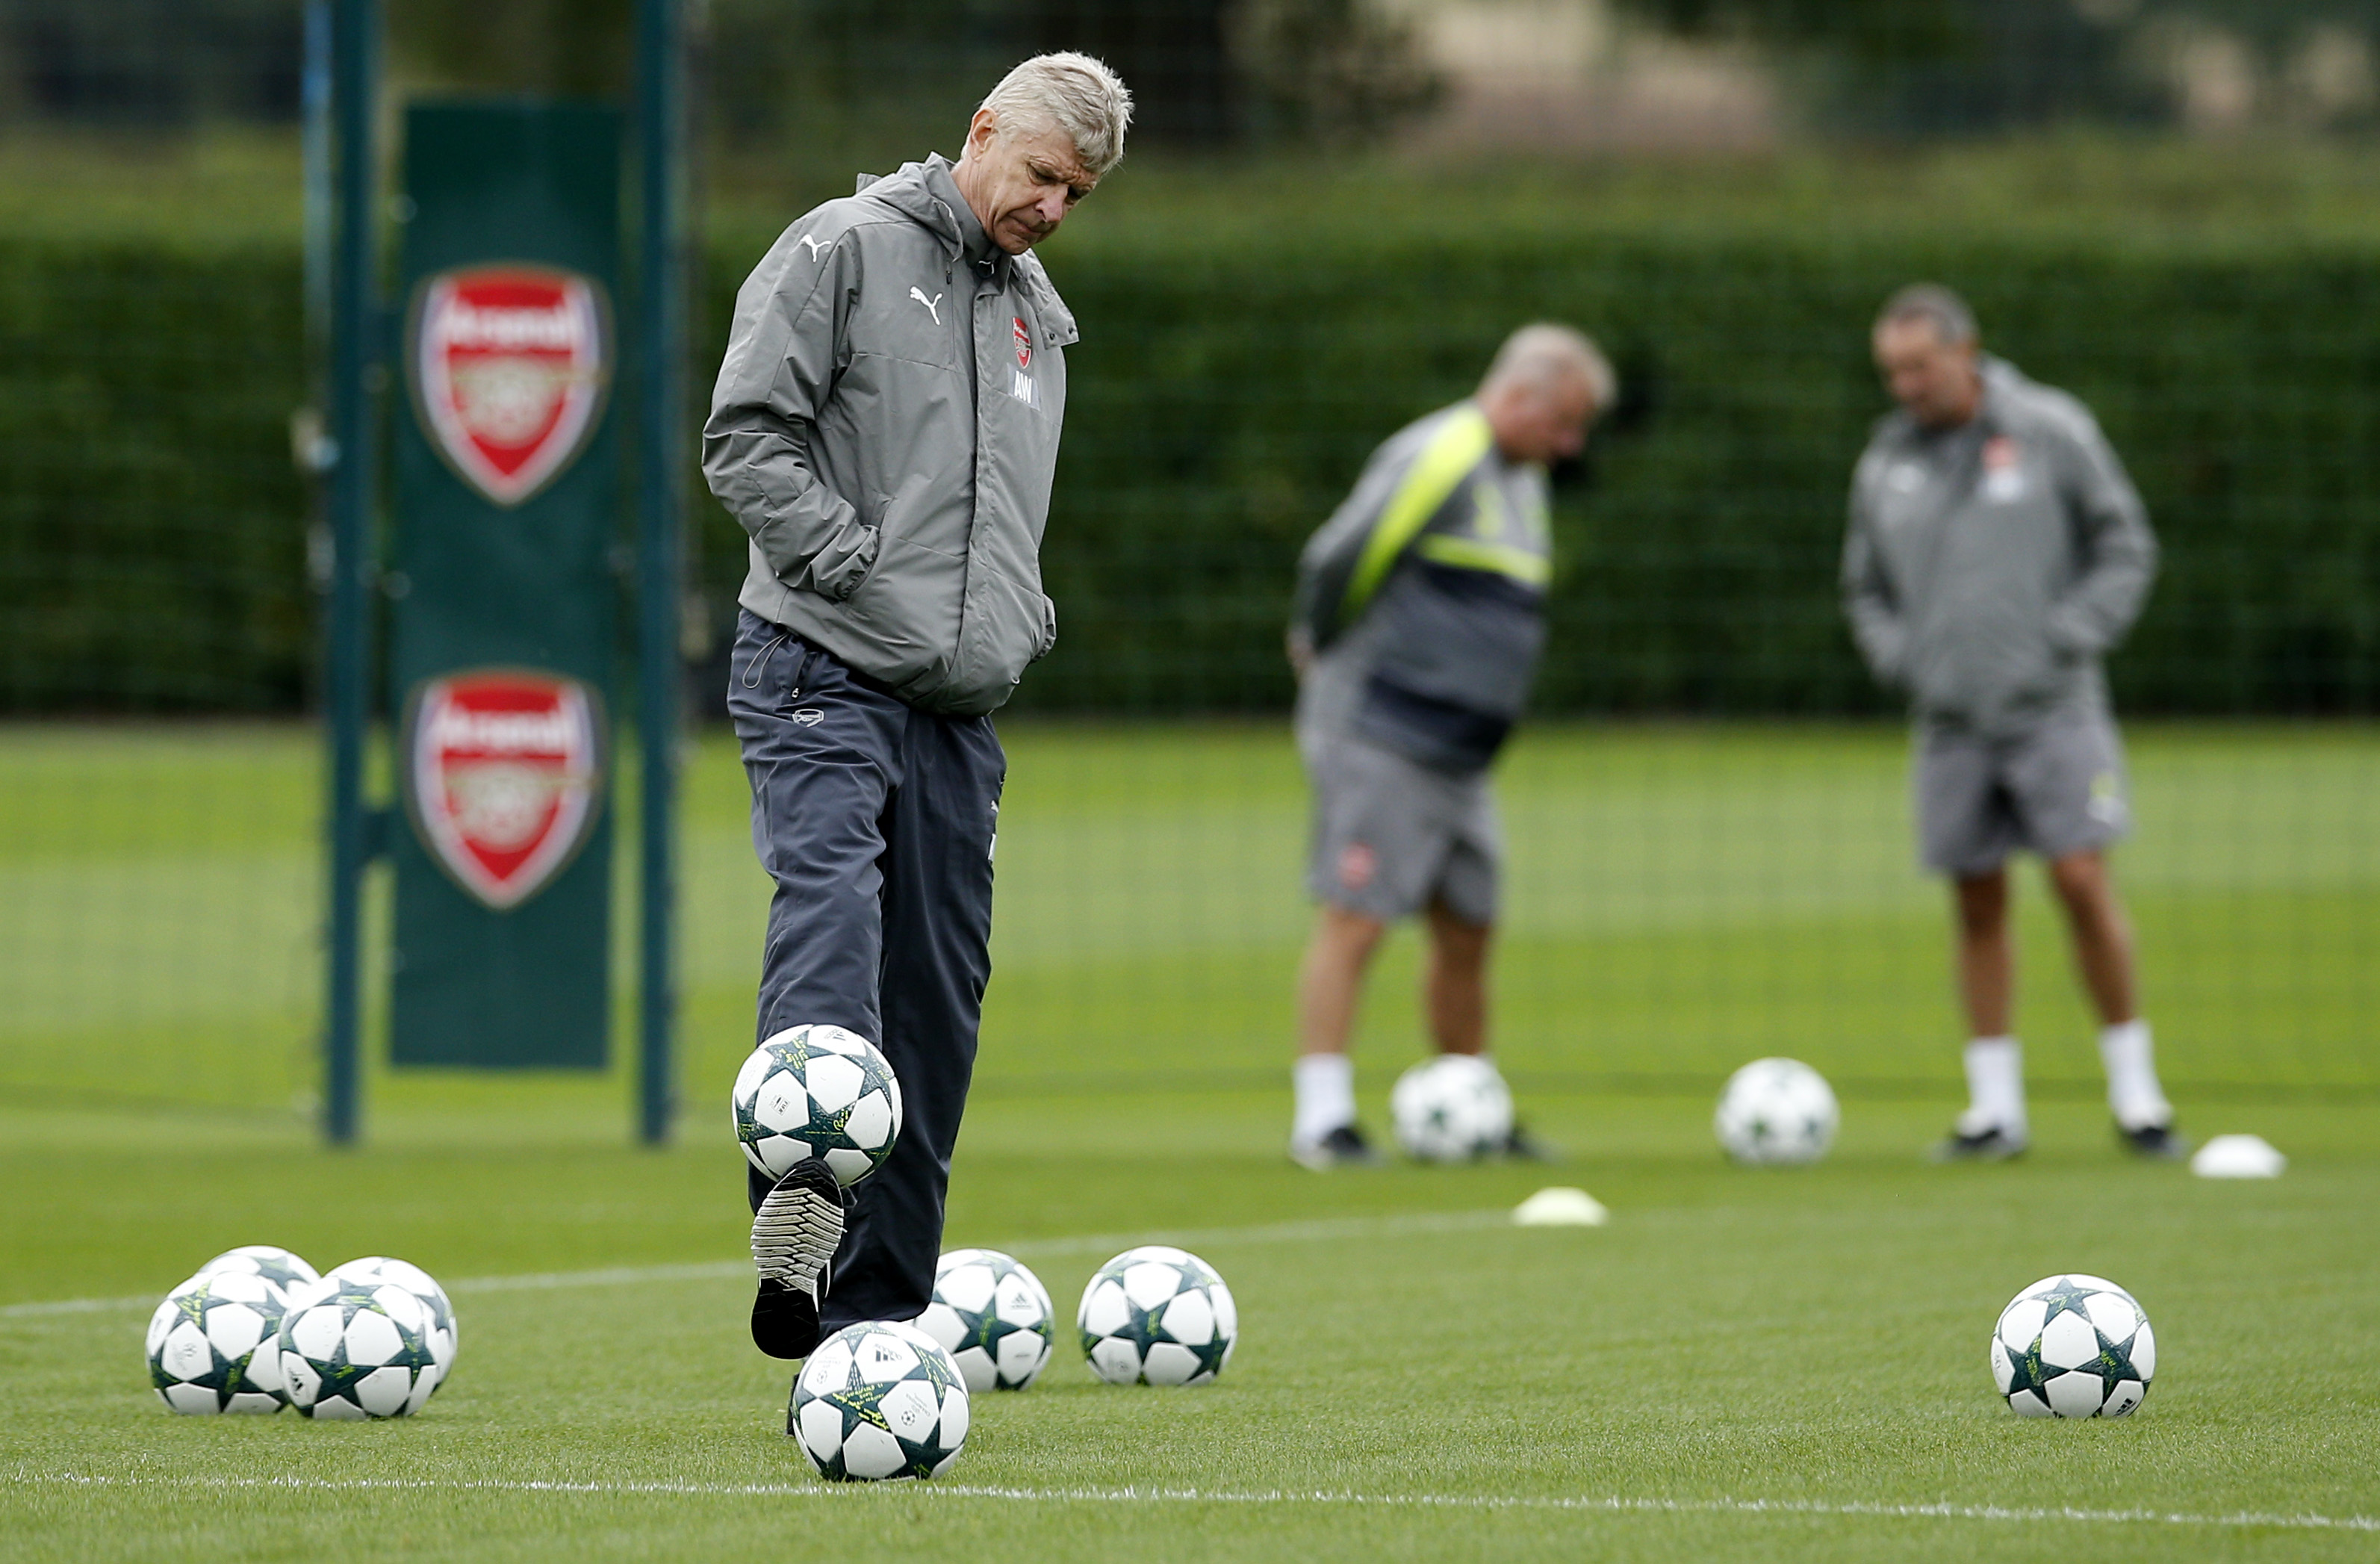 Britain Soccer Football - Arsenal Training - Arsenal Training Ground - 27/9/16 Arsenal manager Arsene Wenger during training Action Images via Reuters / Andrew Couldridge Livepic EDITORIAL USE ONLY.